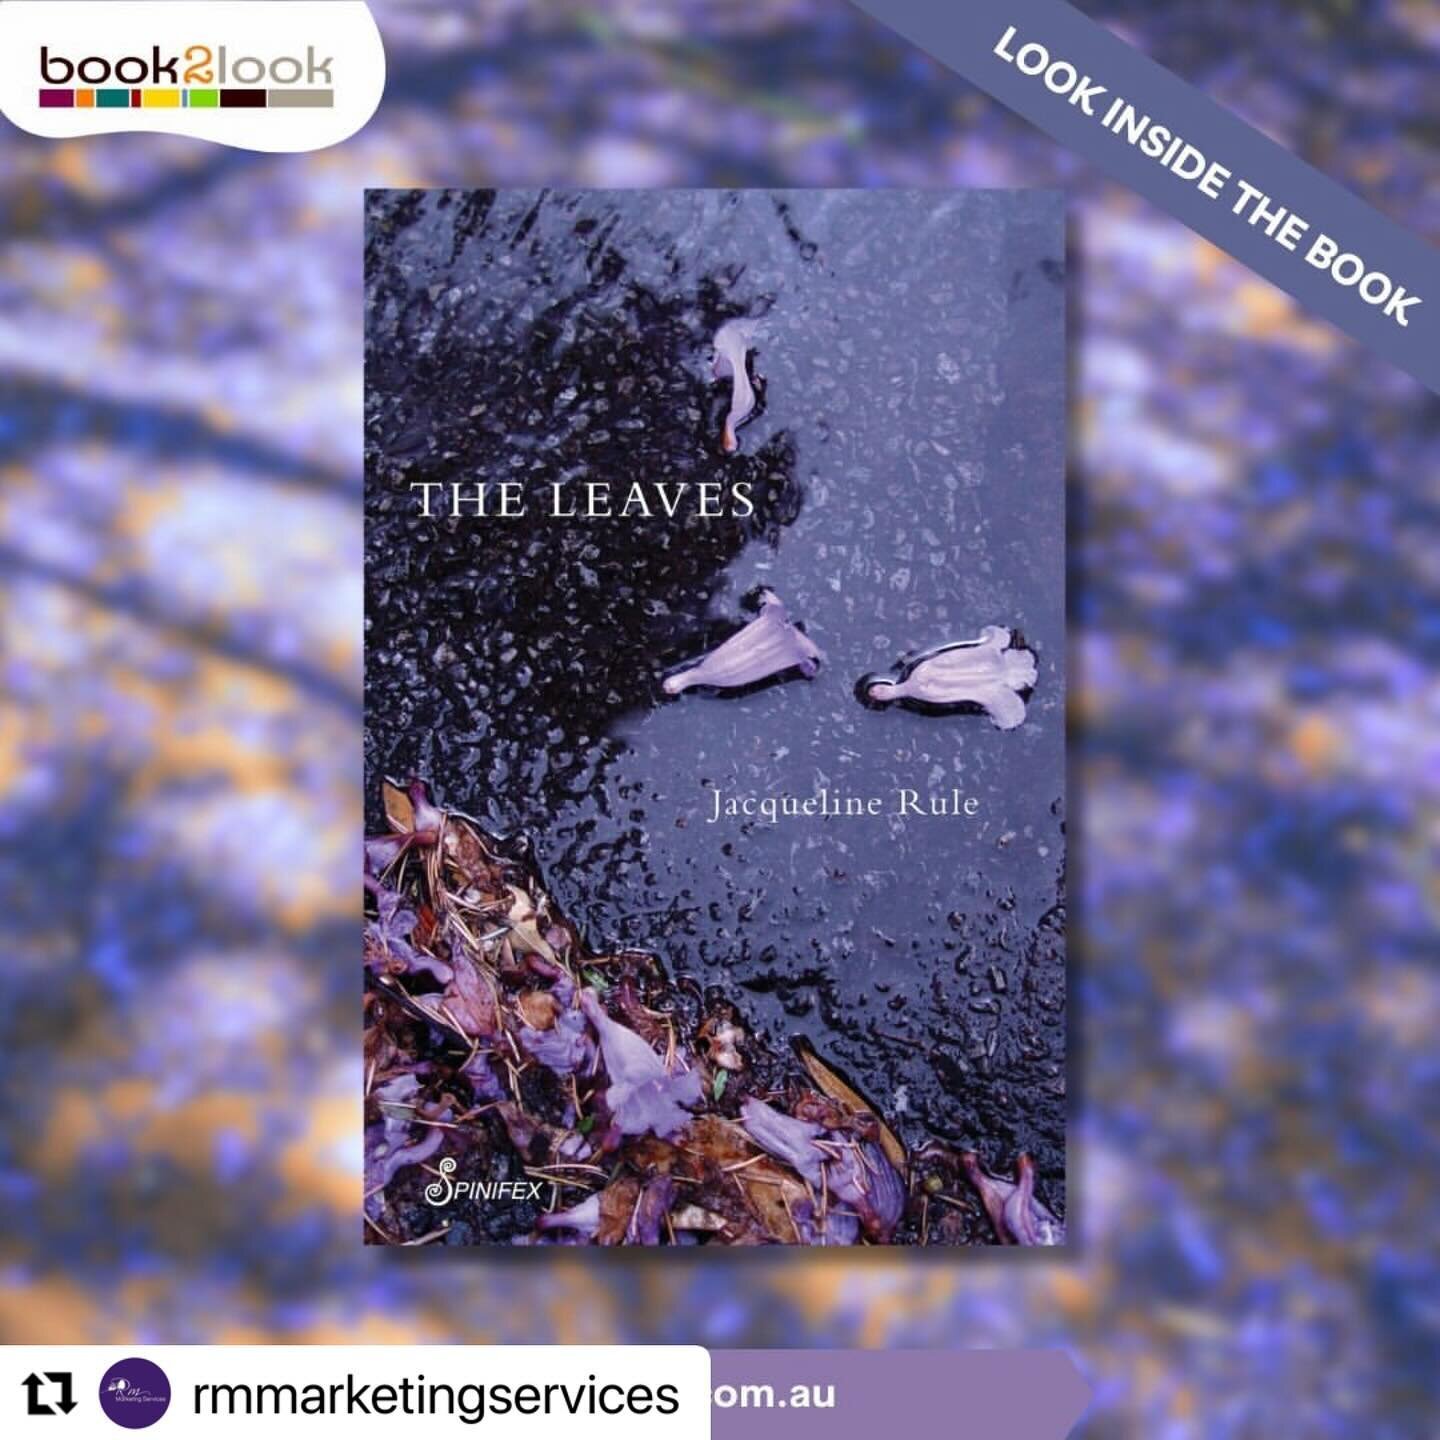 Repost via @rmmarketingservices 
・・・
The Leaves by Jacqueline Rule is heartbreaking and left us thinking about the ending long after we finished reading it. 

Faith and Evelyn are close friends, neighbours, and single mothers of Luke and of Mitch &nd